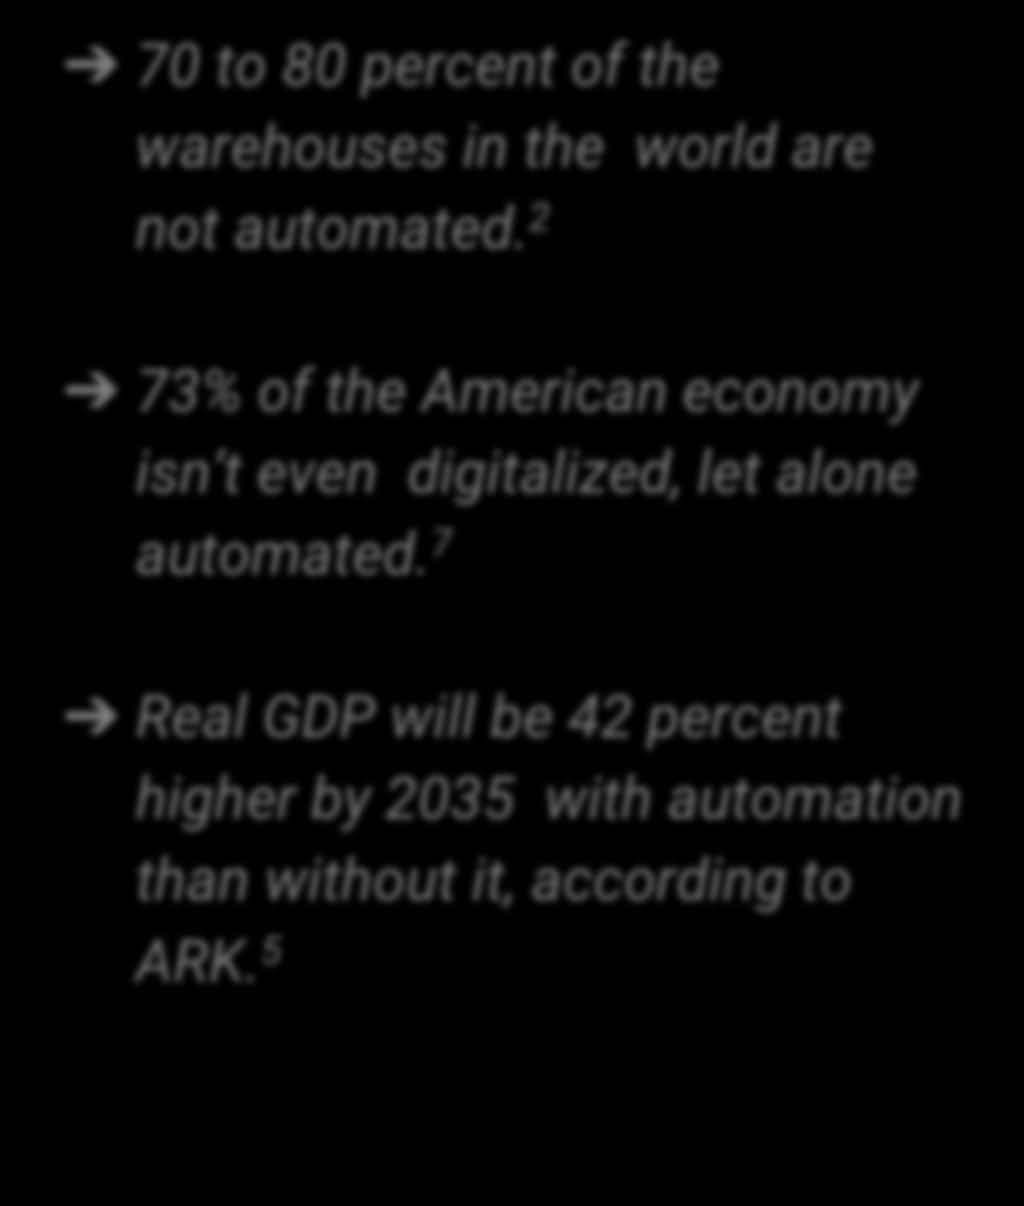 7 Real GDP will be 42 percent higher by 2035 with automation than without it, according to ARK. 5 Mobile robotics in material handling and logistics will become a $75bn market by 2027.